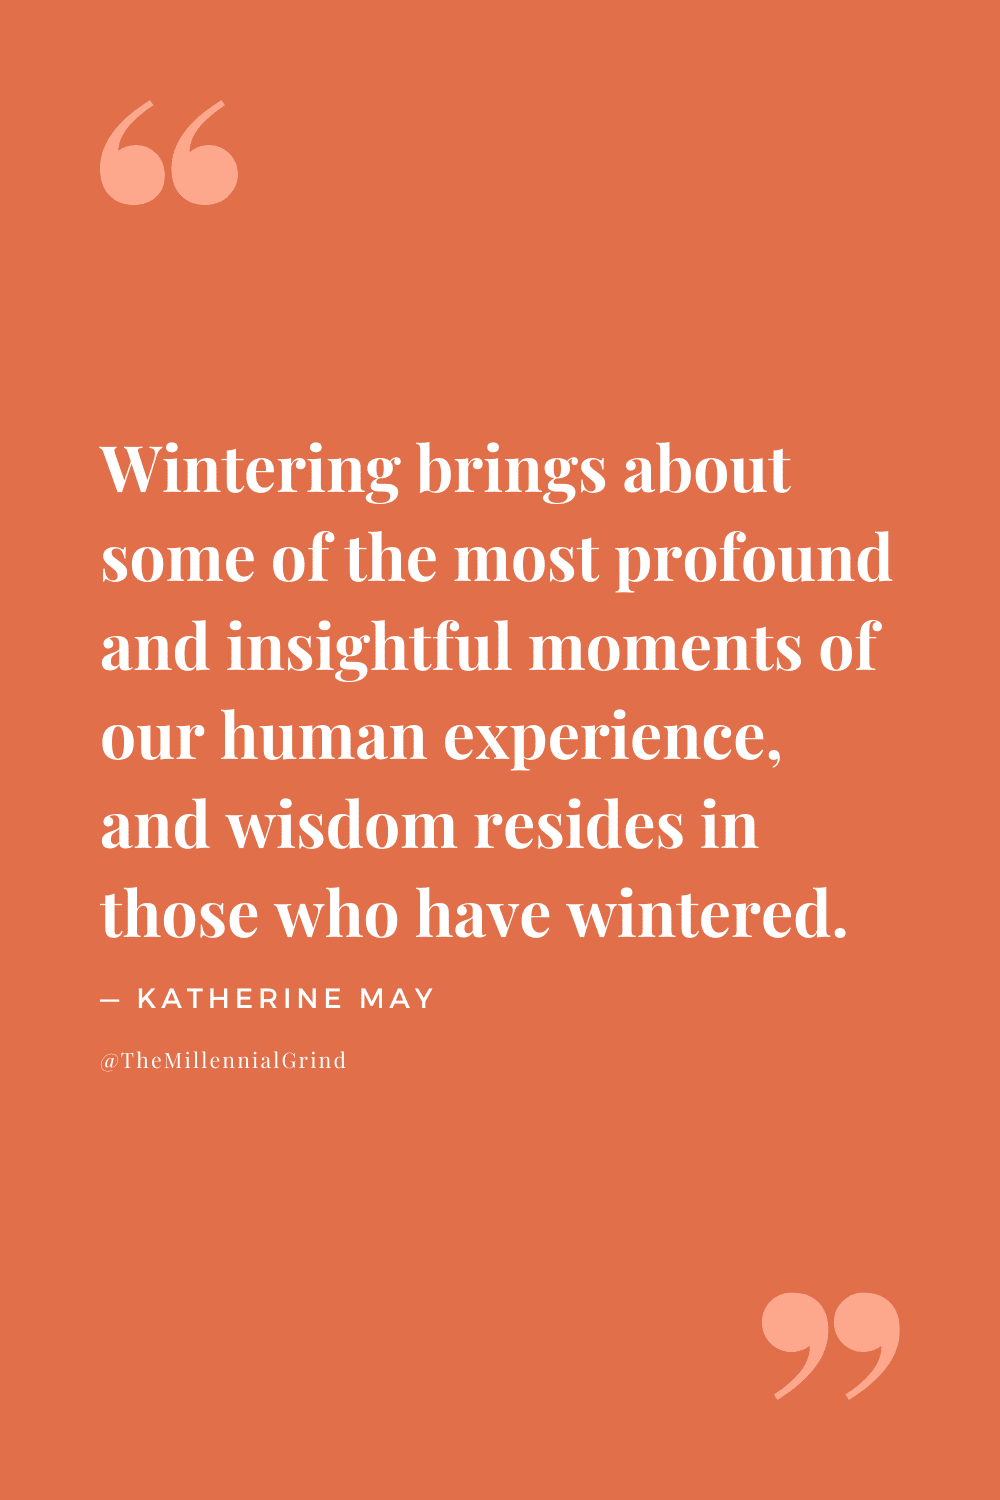 Quotes From Wintering by Katherine May